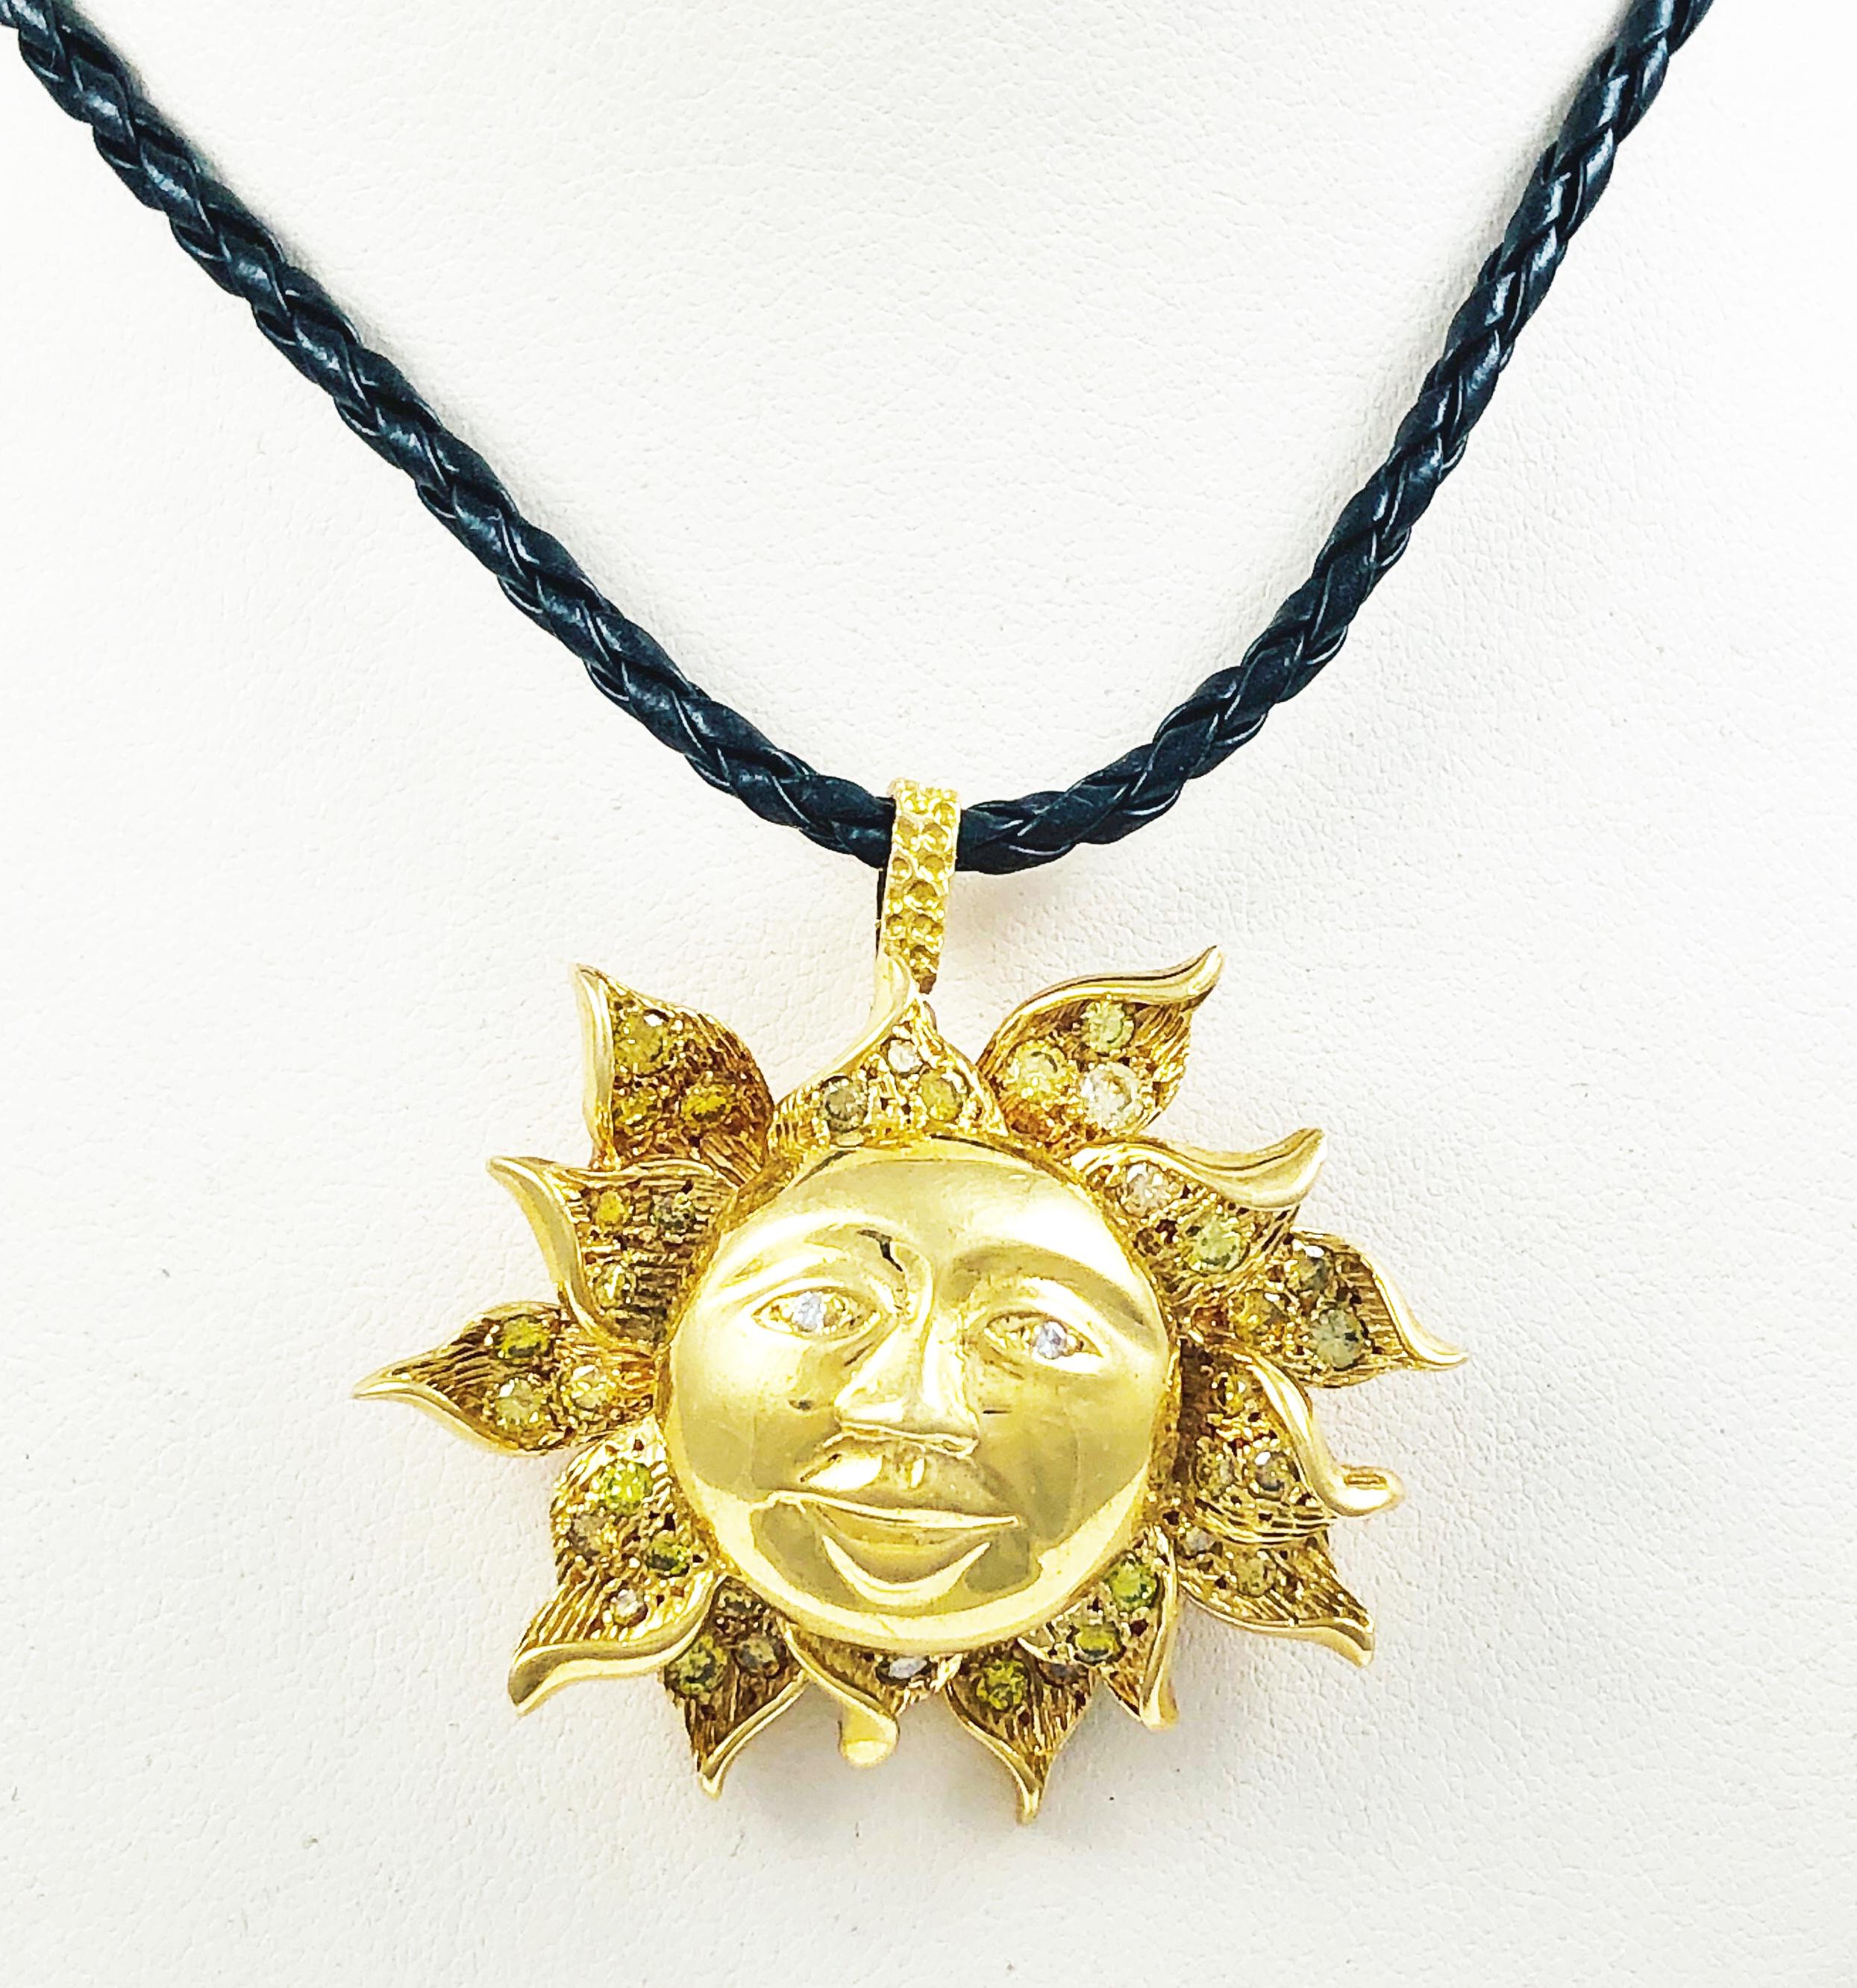 Gorgeous Peter Linderman Sun Pendant! This piece can also be worn as a brooch. This beautiful piece is made in 18K yellow Gold and features 34 various colored diamonds ( Brown, yellow & white)! It  measures 2 inches by 1.75 inches and comes with a